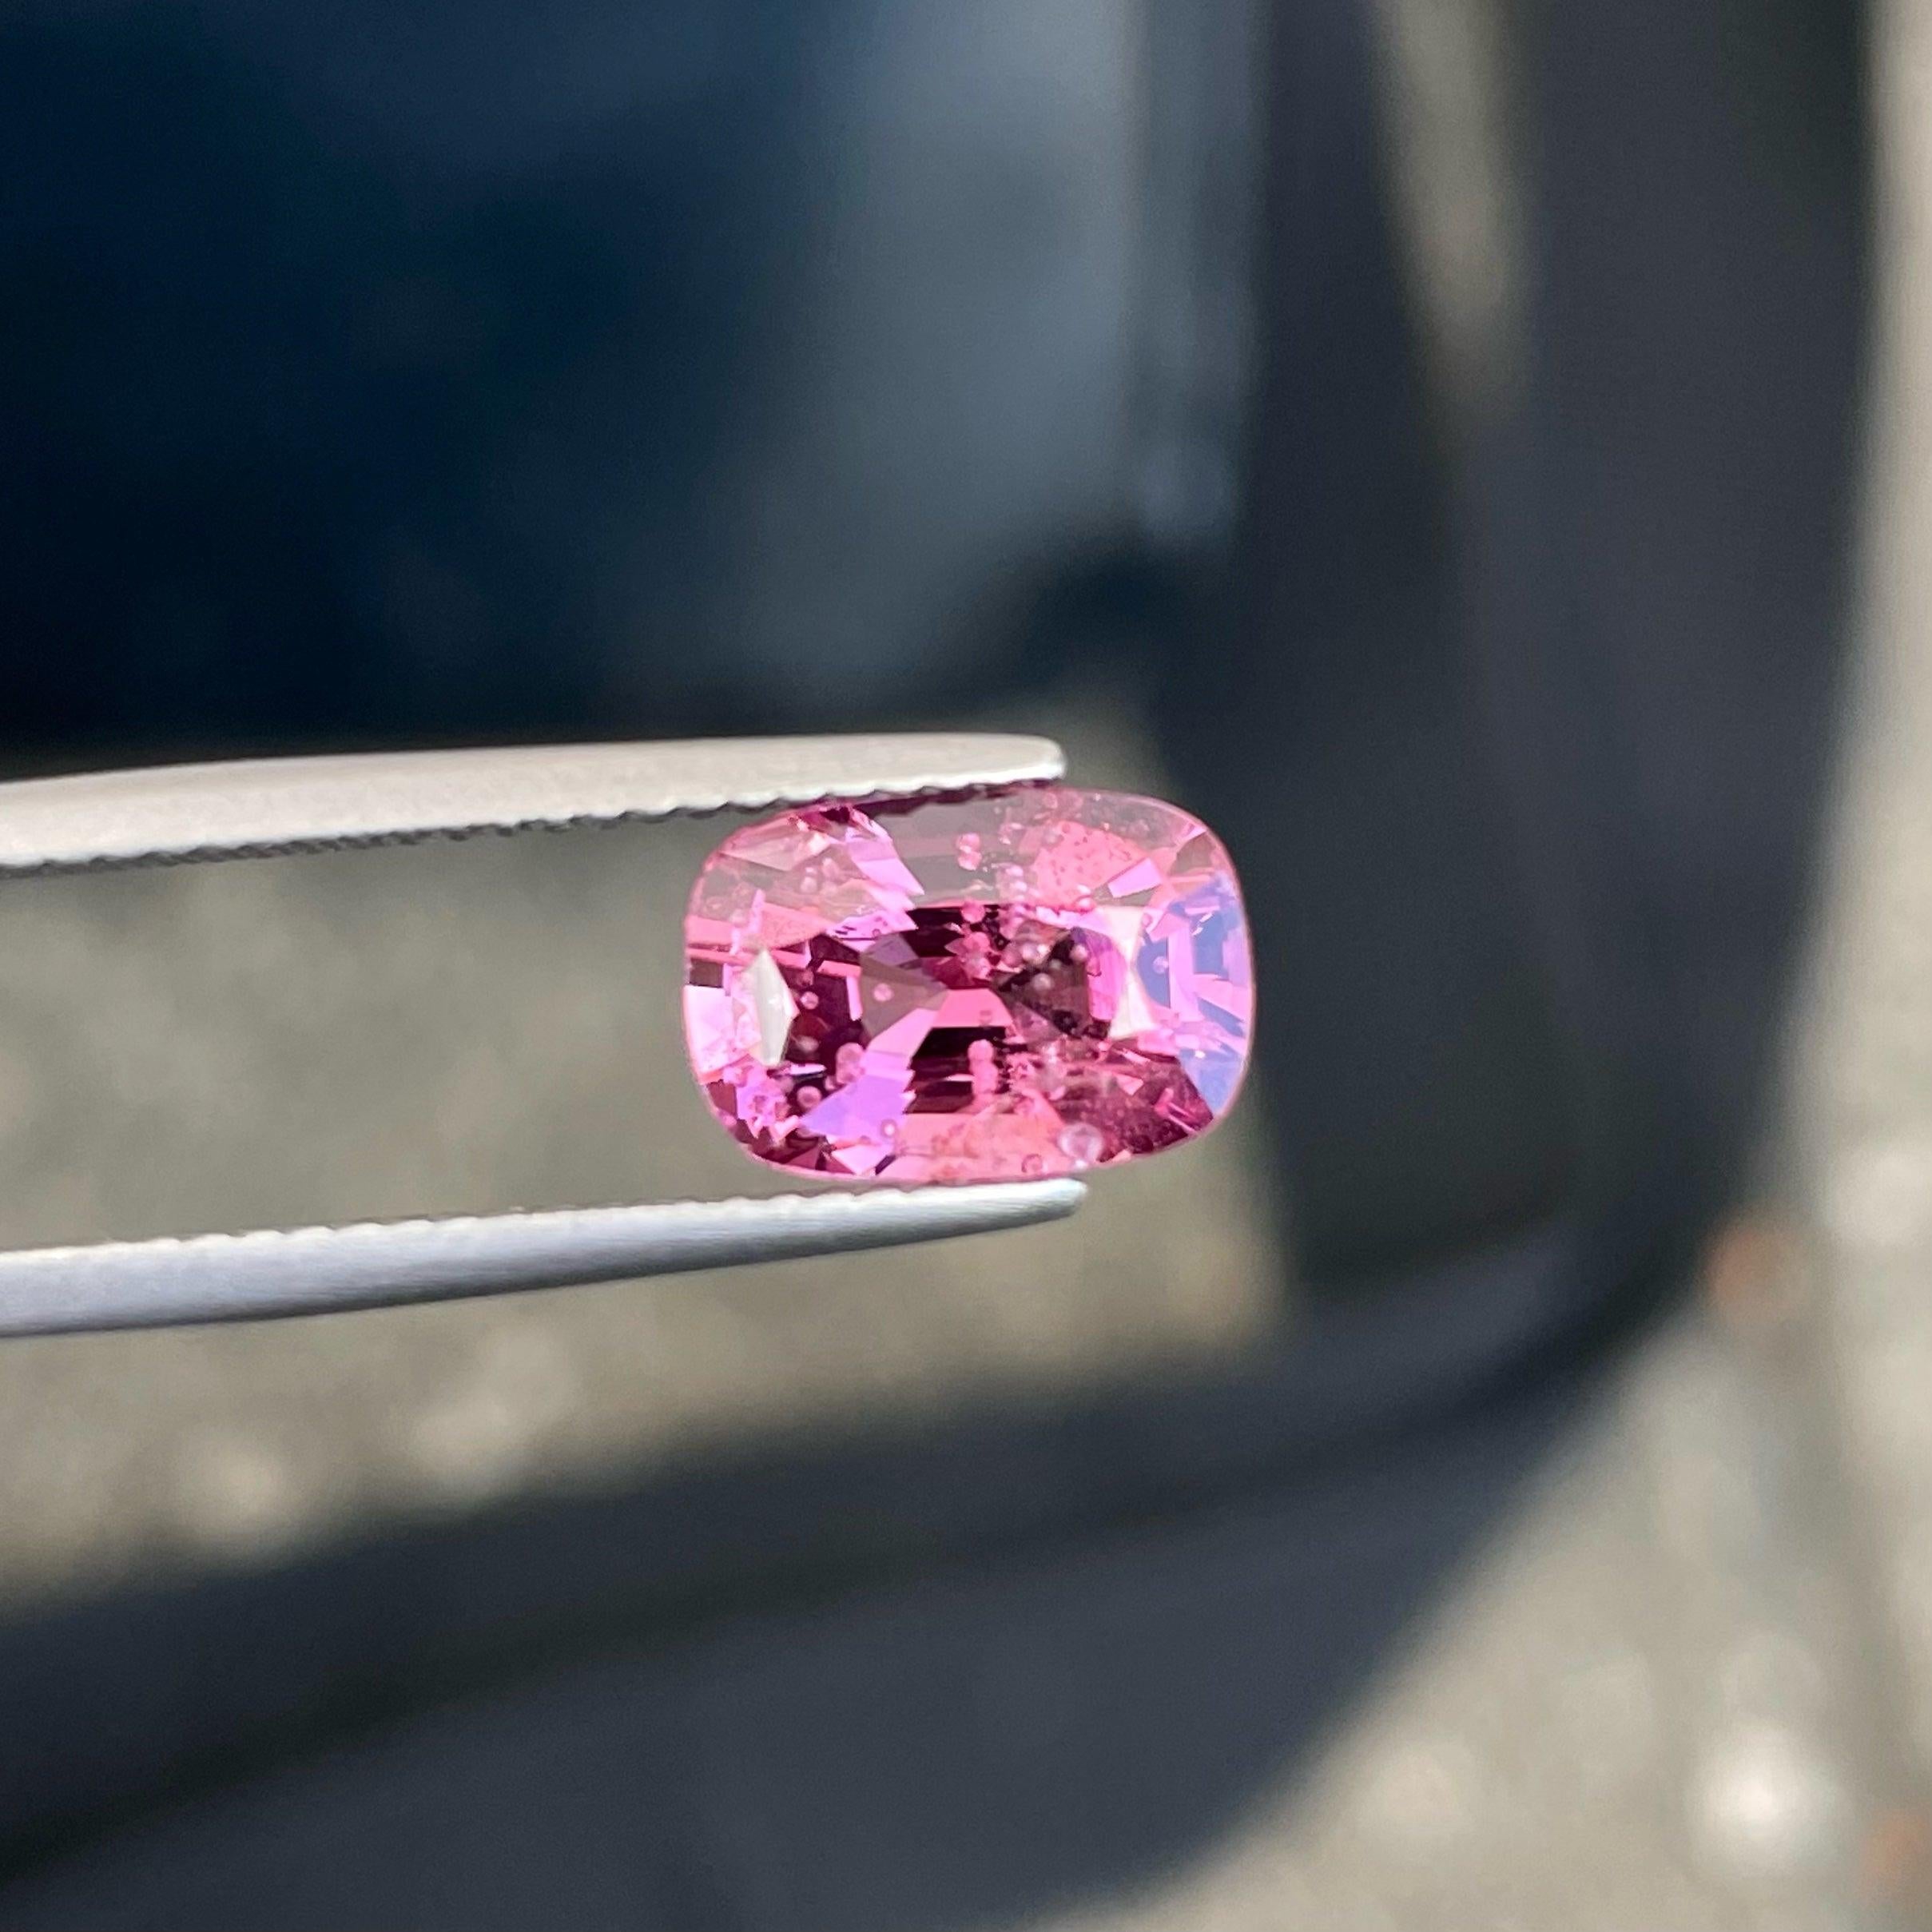 Hot Pink Sakura Spinel Loose Stone of 3.0 carats from Burma has a wonderful cut in a Cushion shape, incredible Pink color. Great brilliance. This gem is SI Clarity.

Product Information:
GEMSTONE TYPE:	Hot Pink Sakura Spinel Loose Stone
WEIGHT:	3.0